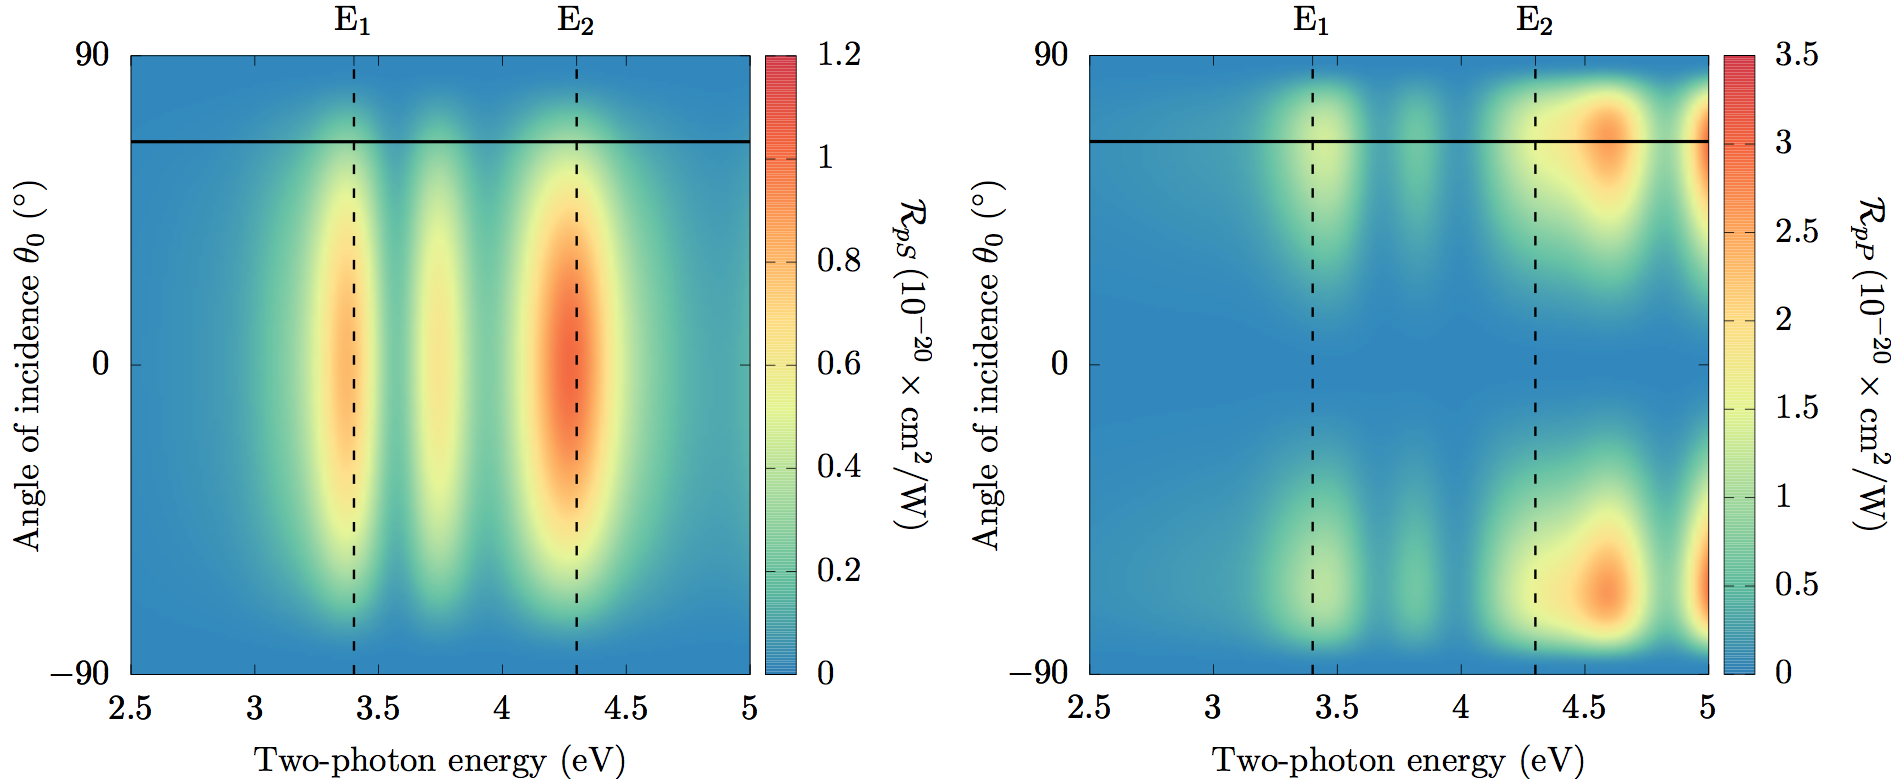 An overview of the angular dependence of the SHG Yield for the Si(111)(1x1)H surface